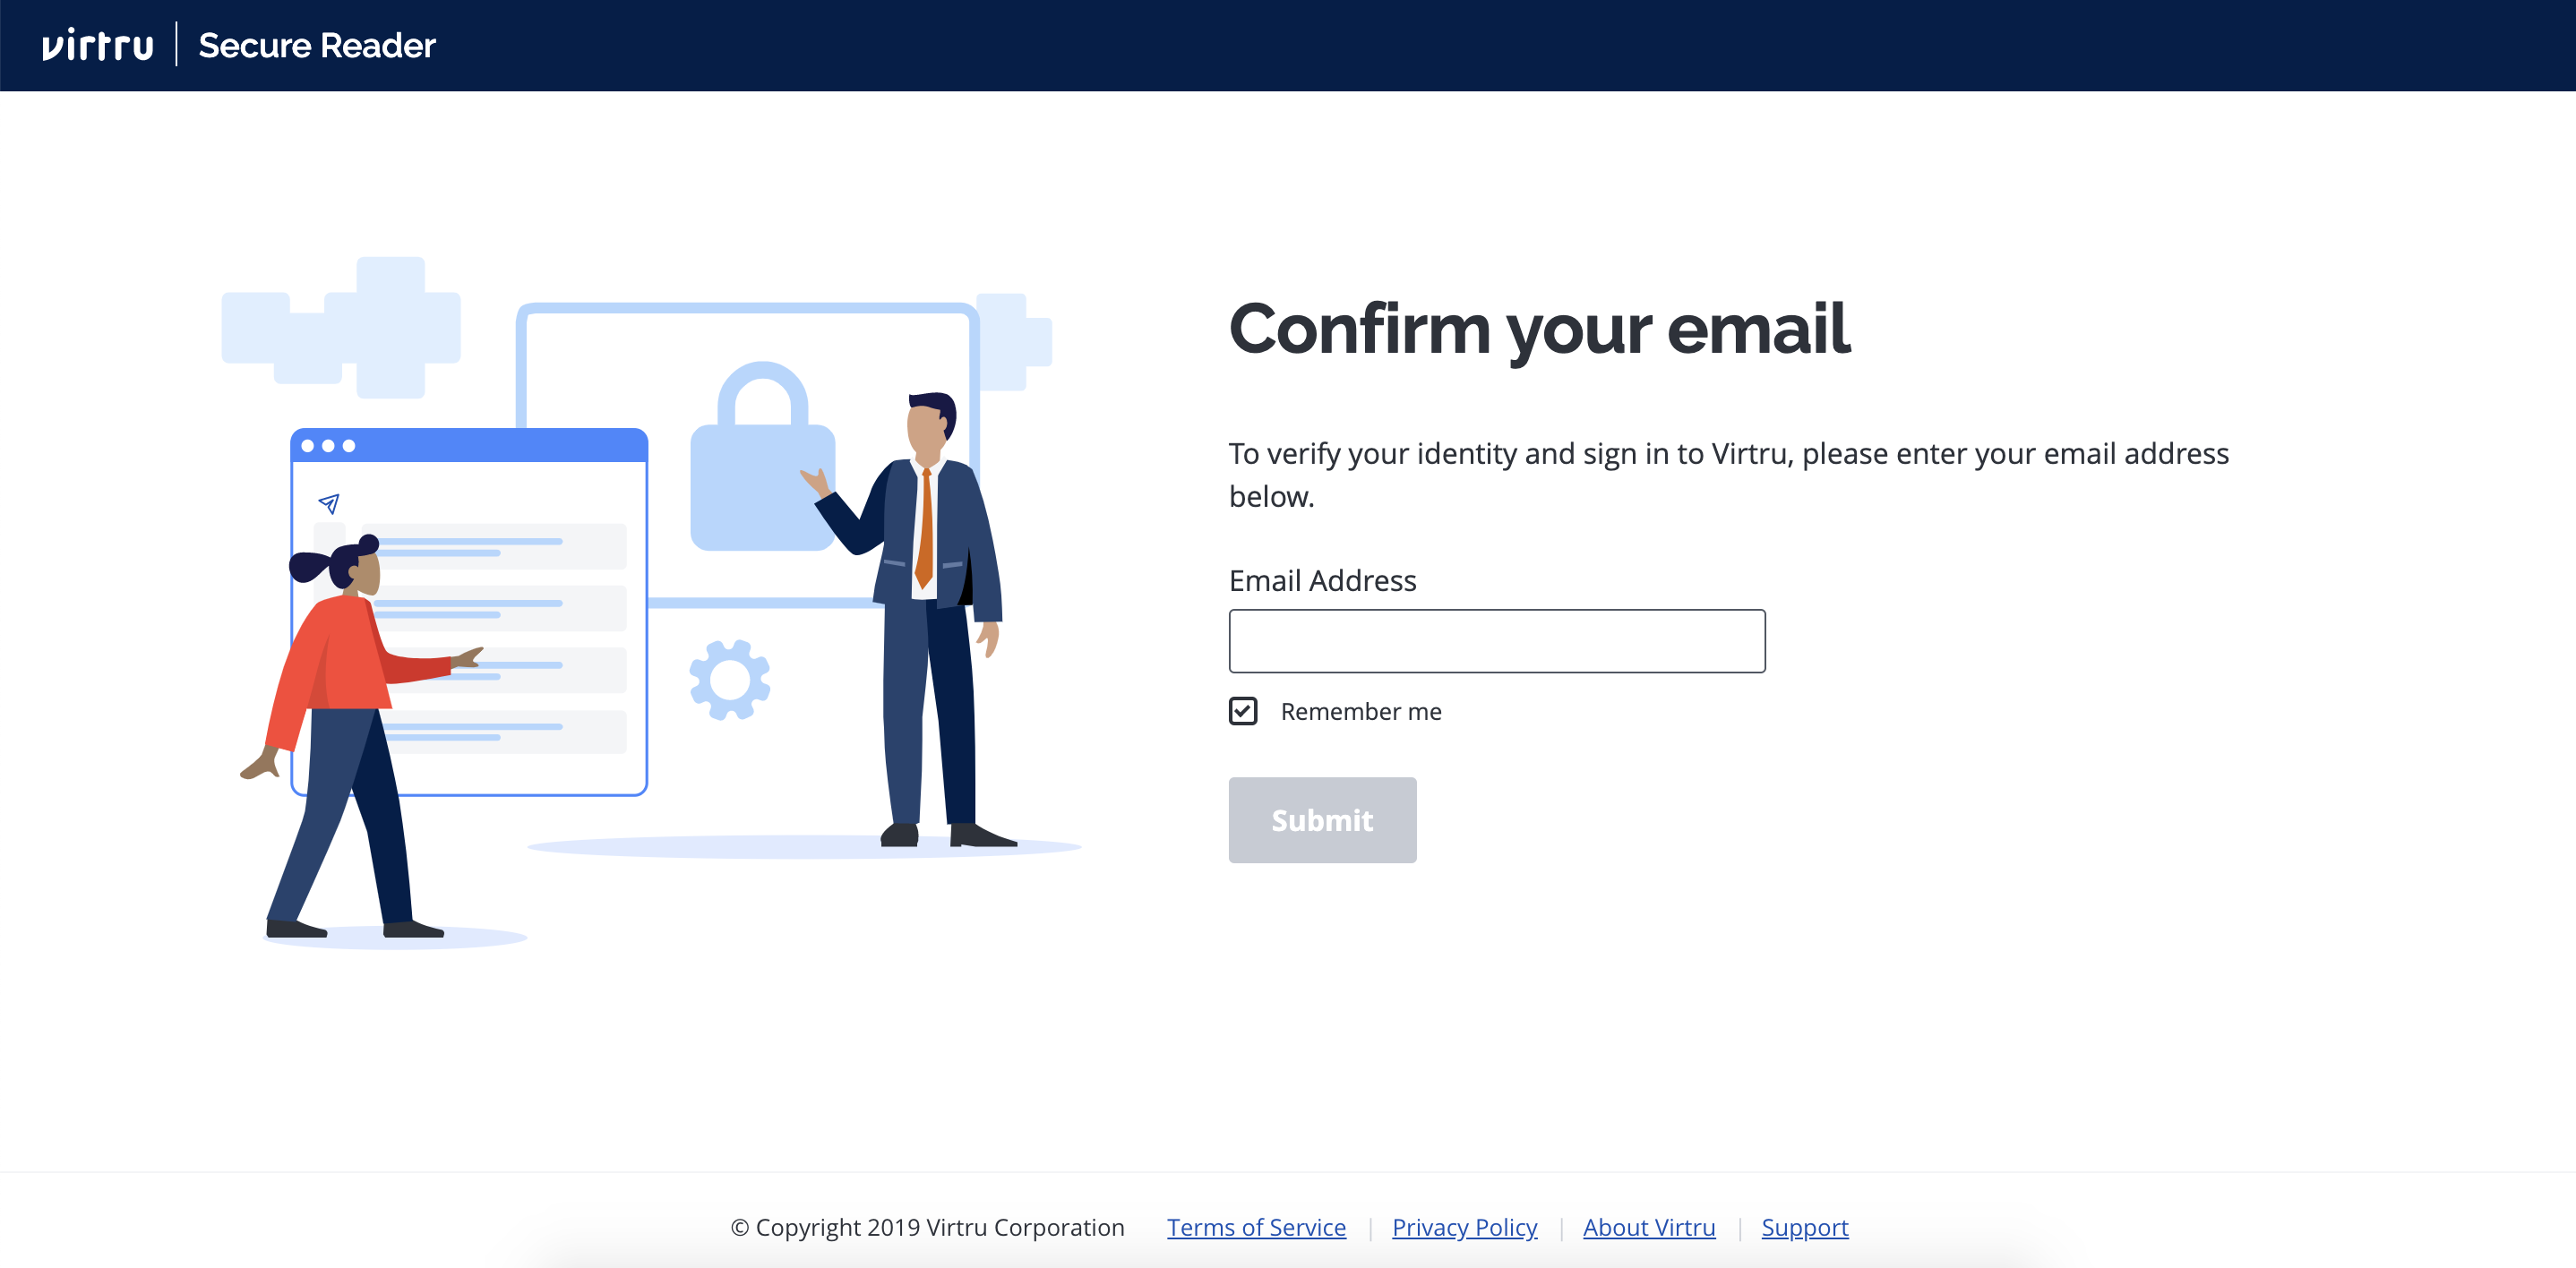 Confirm your email